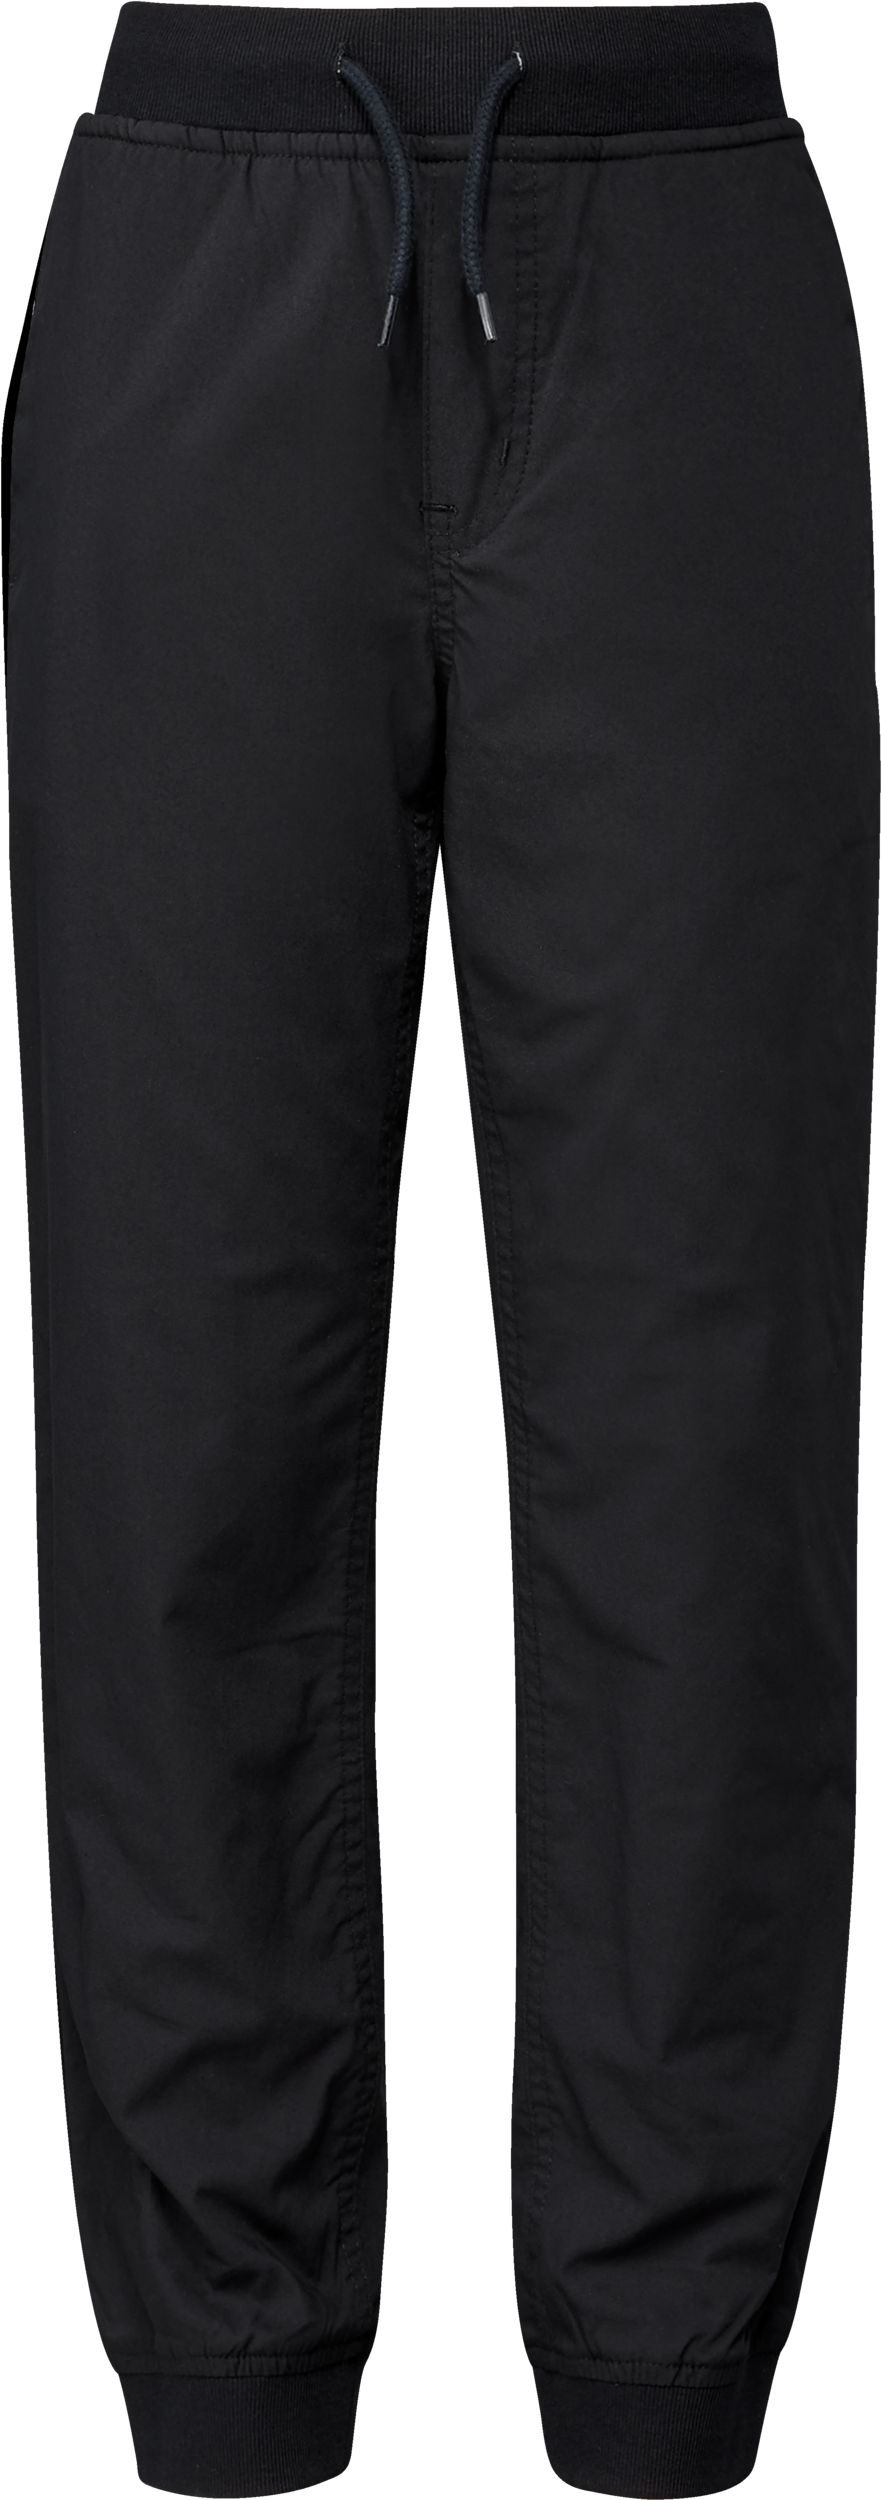 Ripzone Kids' Boys' Spencer Lined Joggers Pants, Casual, Lounge | SportChek